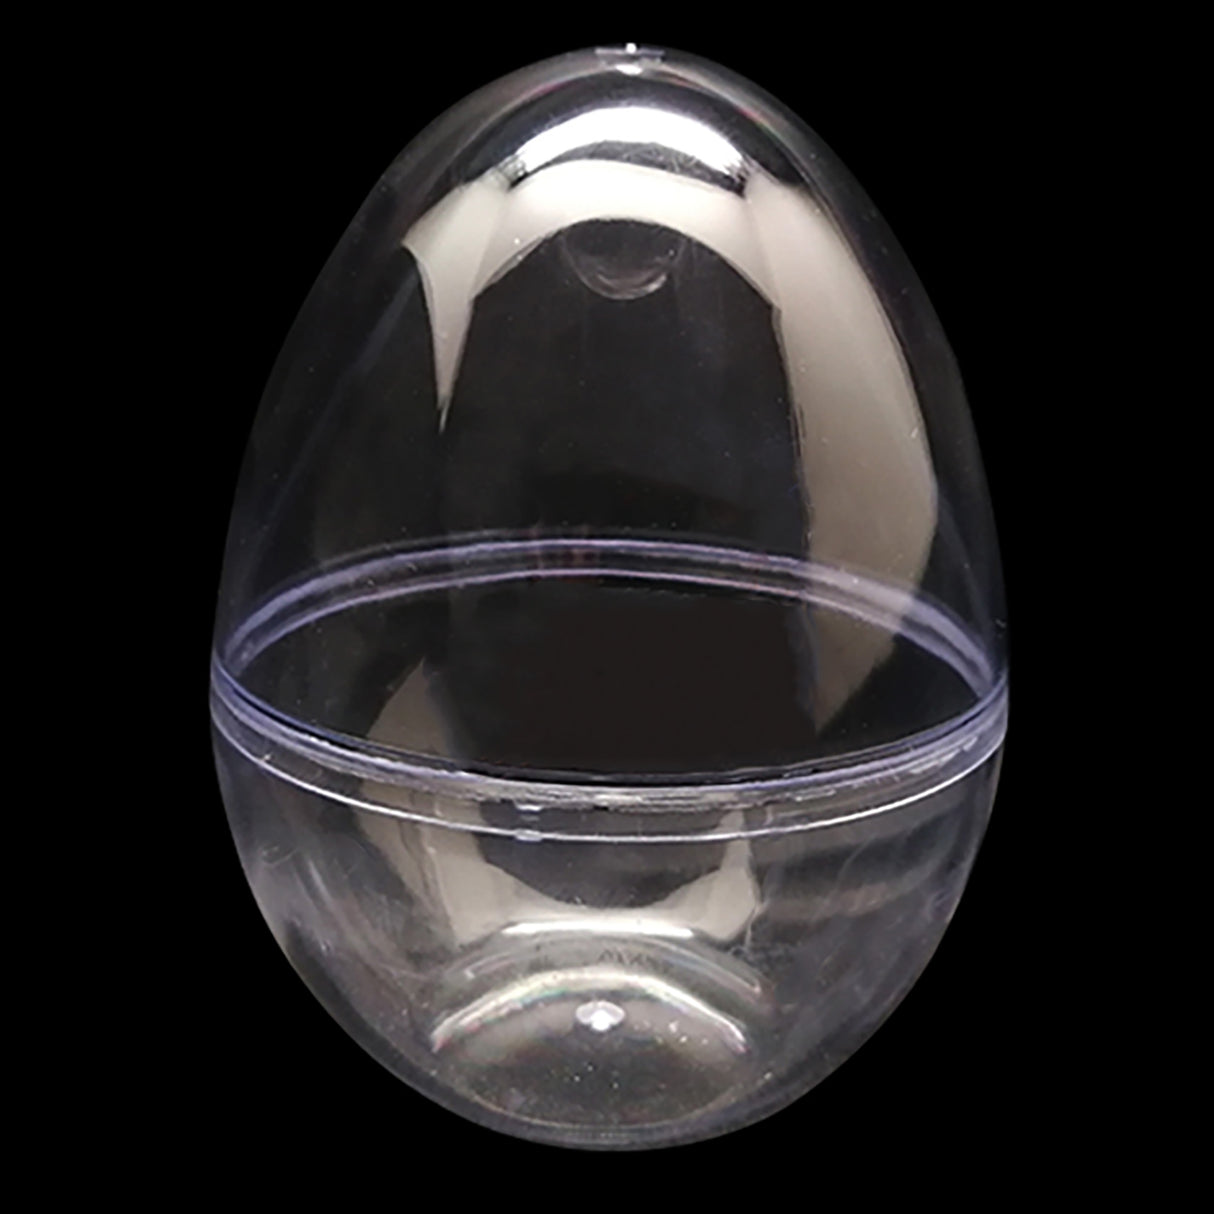 Shop Set of 3 Clear Plastic Standing Egg Ornaments 3.58 Inches (91 mm). Buy Christmas Ornaments Clear Plastic Egg Clear Oval Plastic for Sale by Online Gift Shop BestPysanky tree decorations personalized xmas animals decorative home online best festive gifts beautiful unique luxury collectible Europe ball figurines ideas mouth blown hand painted made vintage style old fashioned mercury German